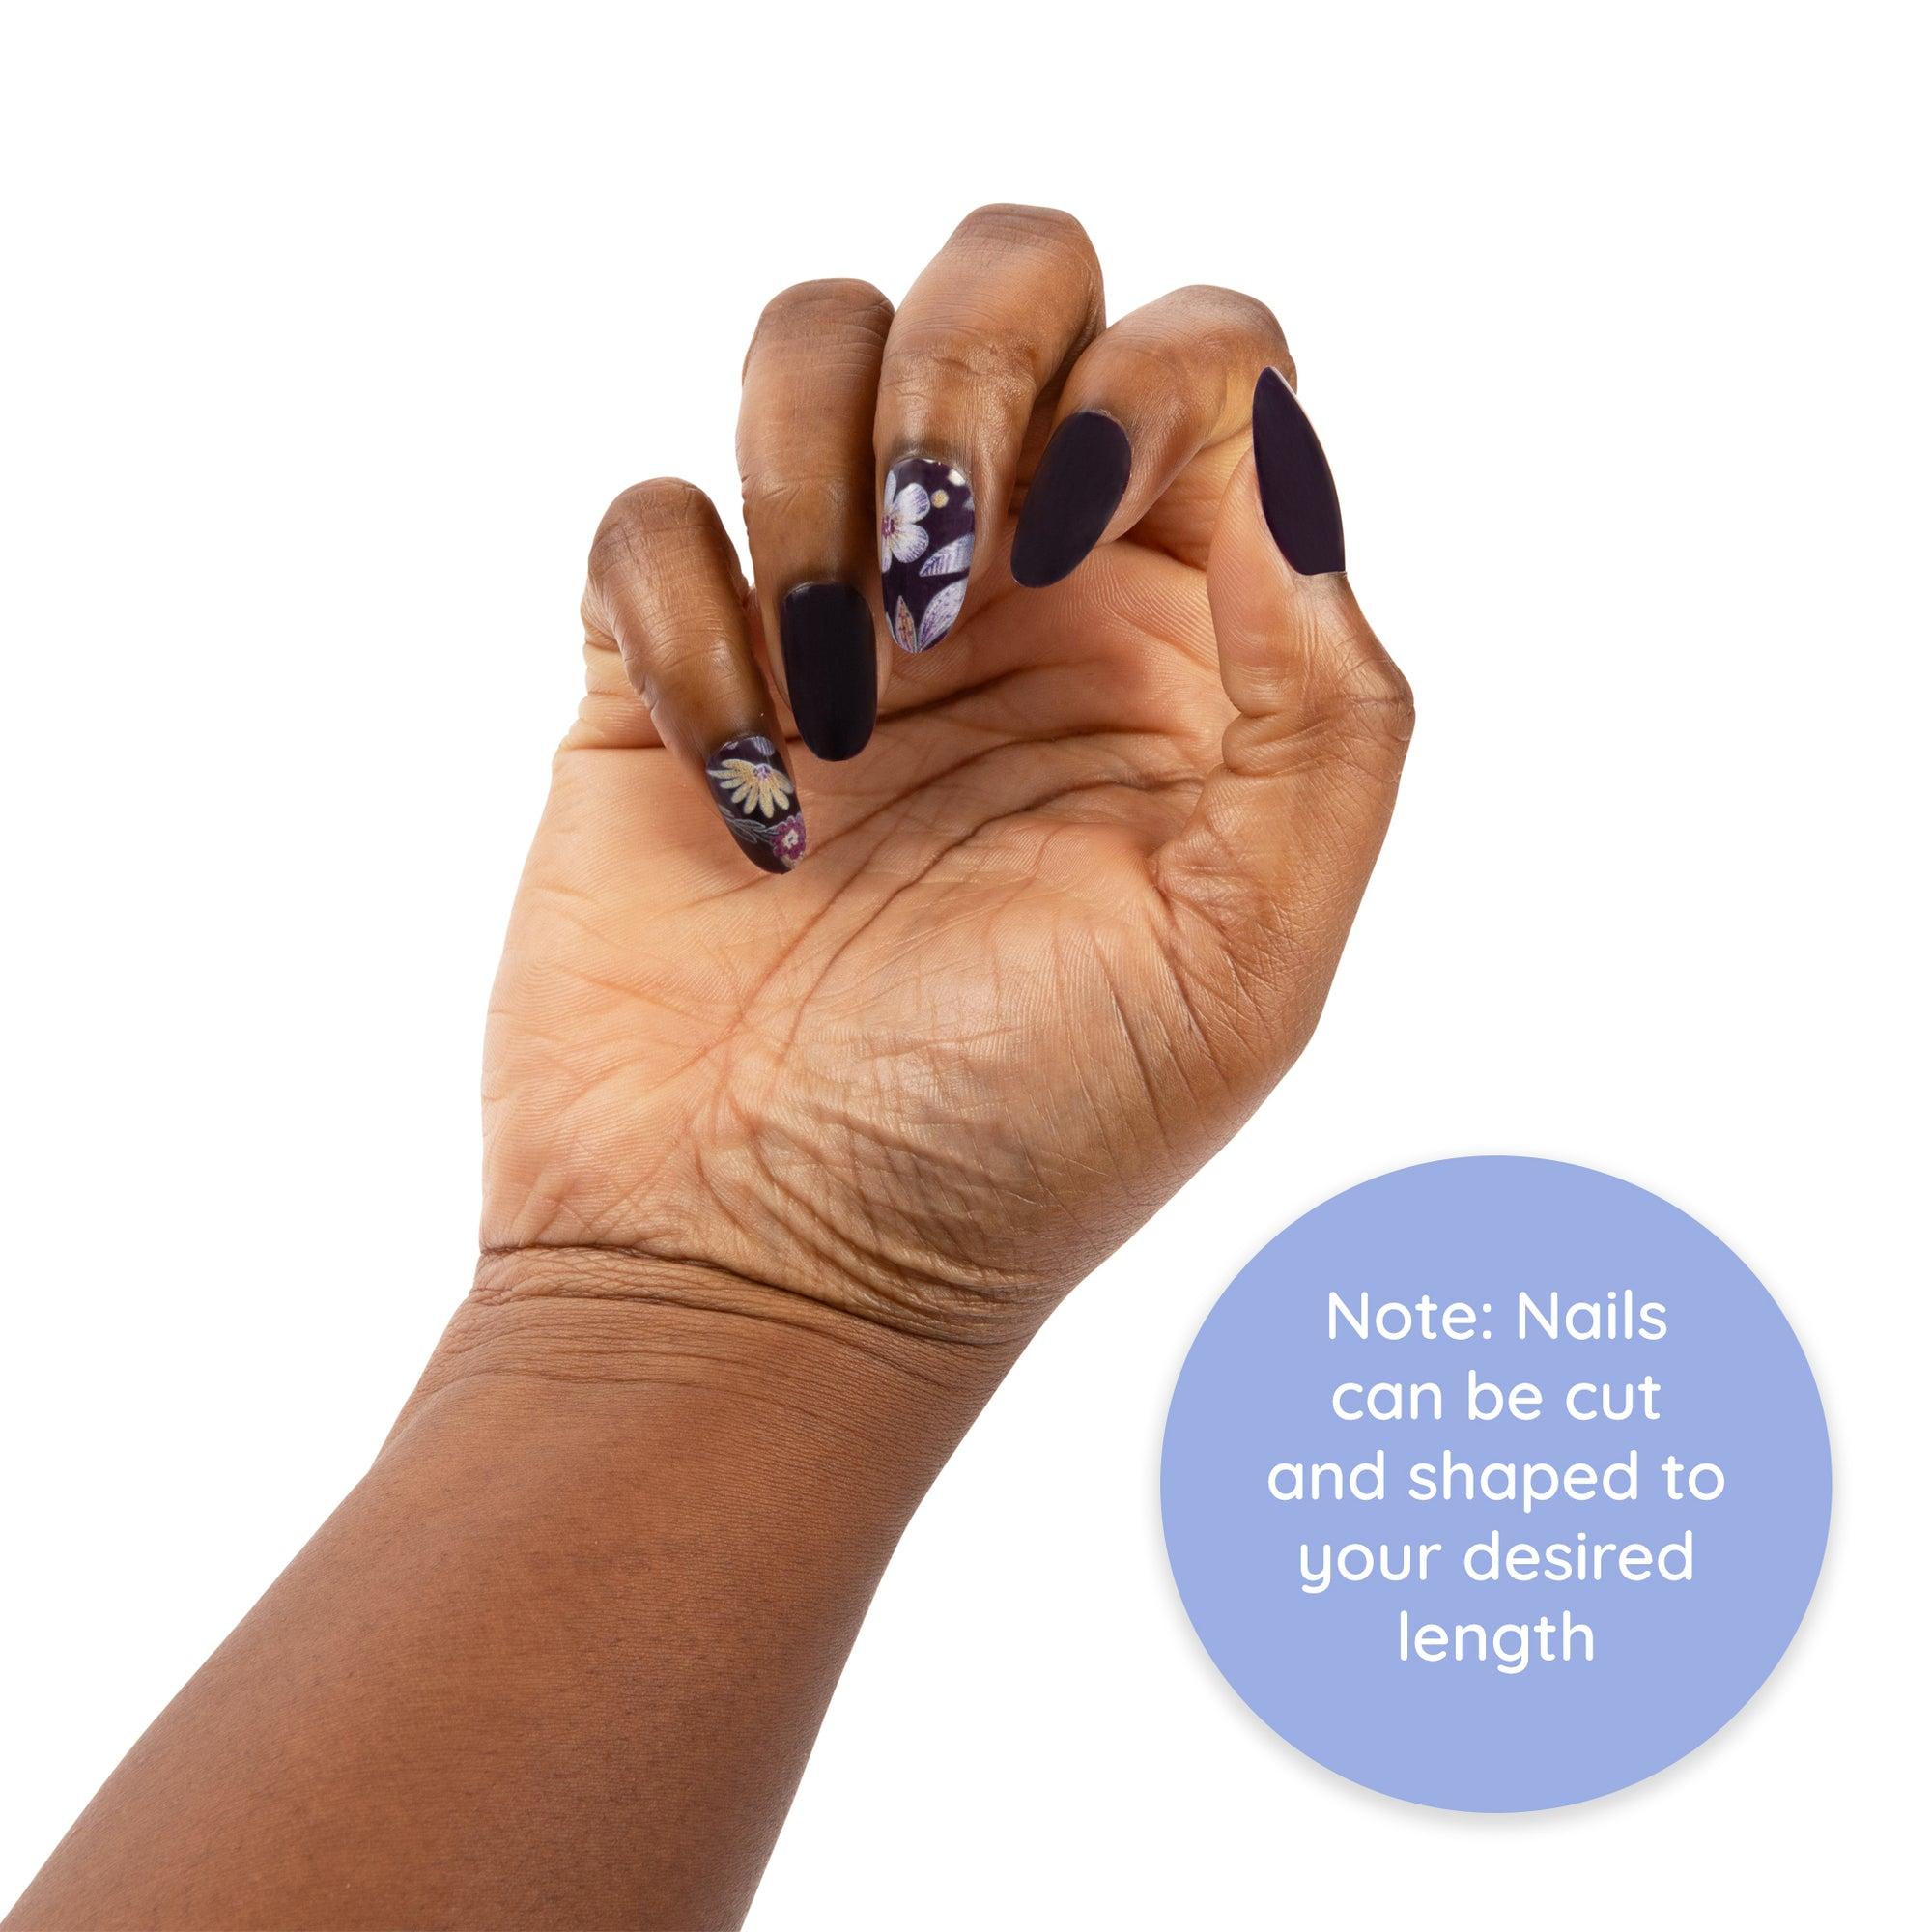 ExpressionMed Just BeCause press on fake nail set in dark purple floral design, Nails can be cut and shaped to your desired length	